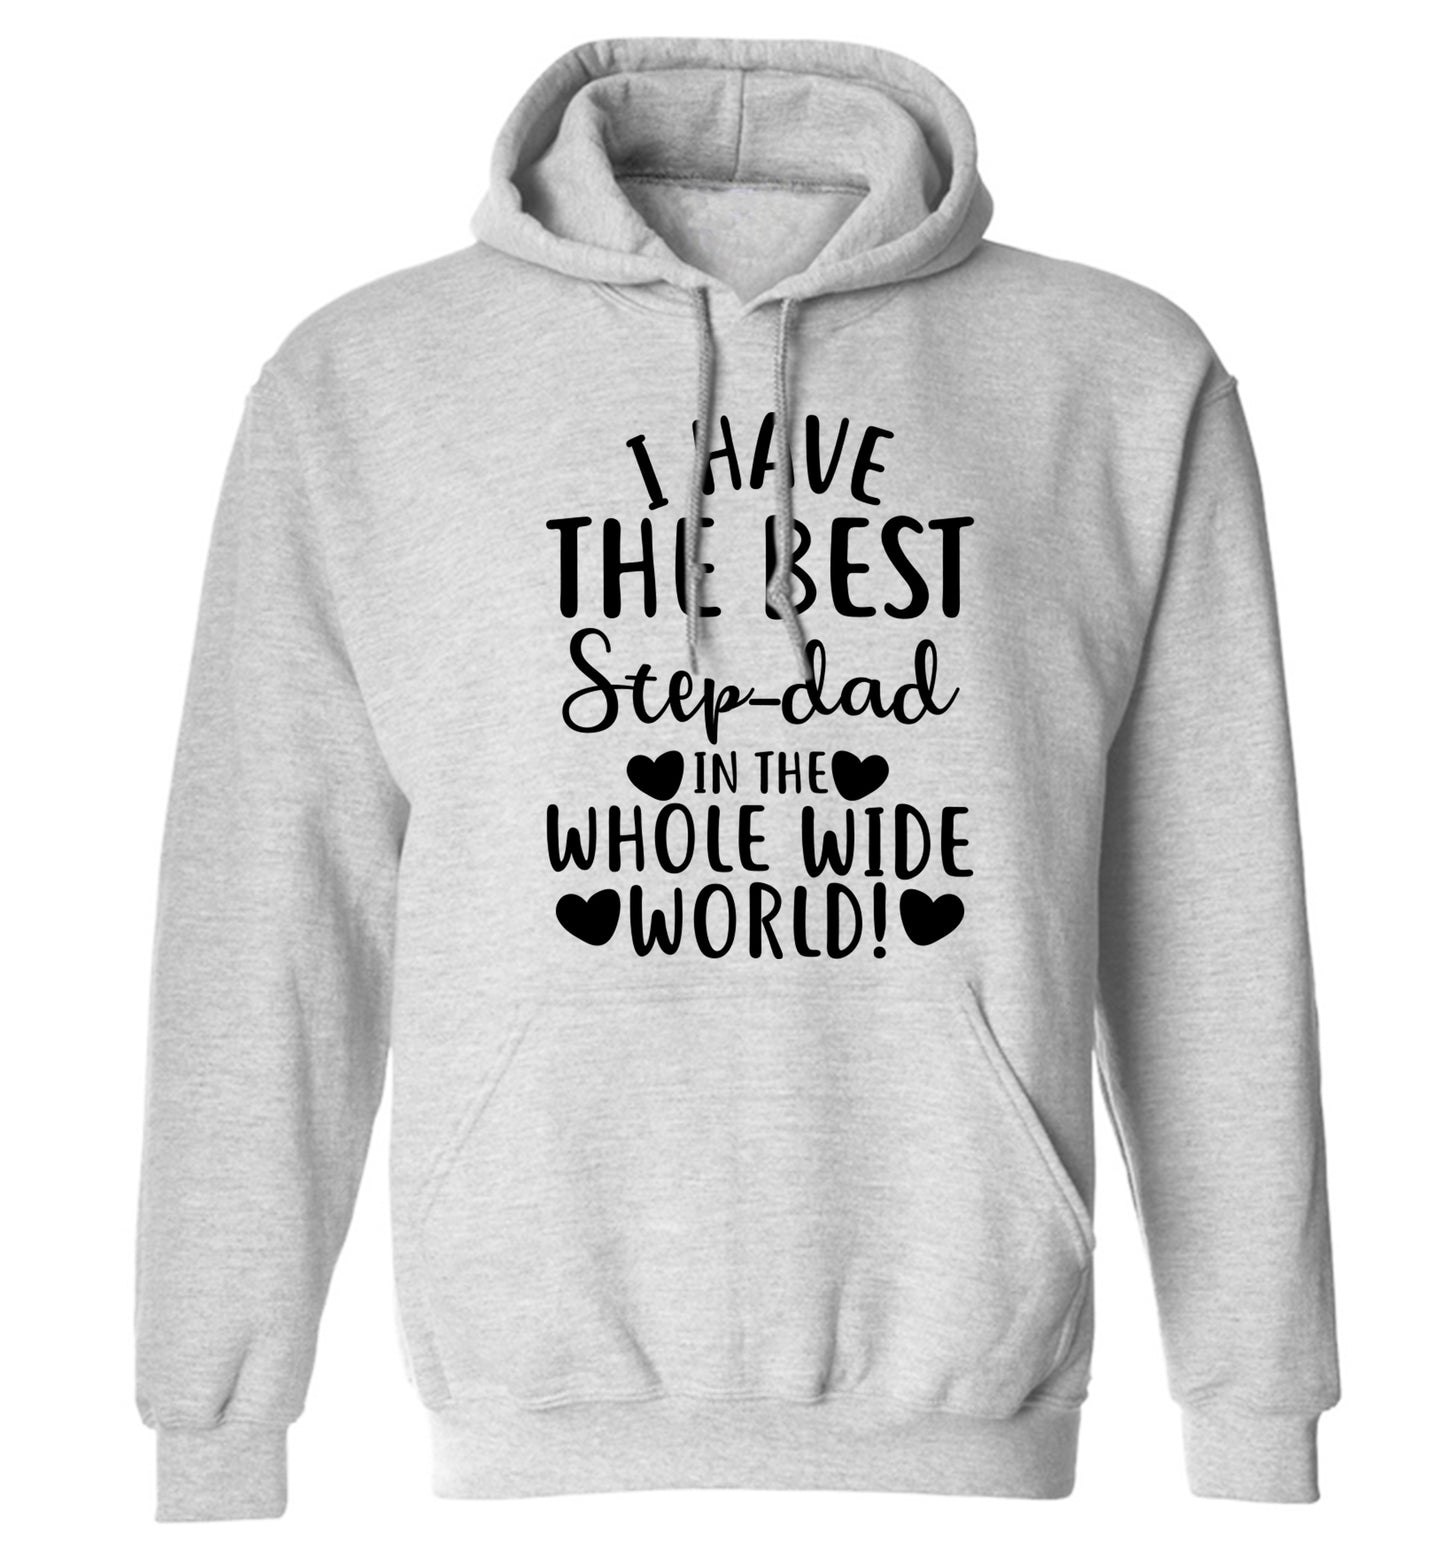 I have the best step-dad in the whole wide world! adults unisex grey hoodie 2XL